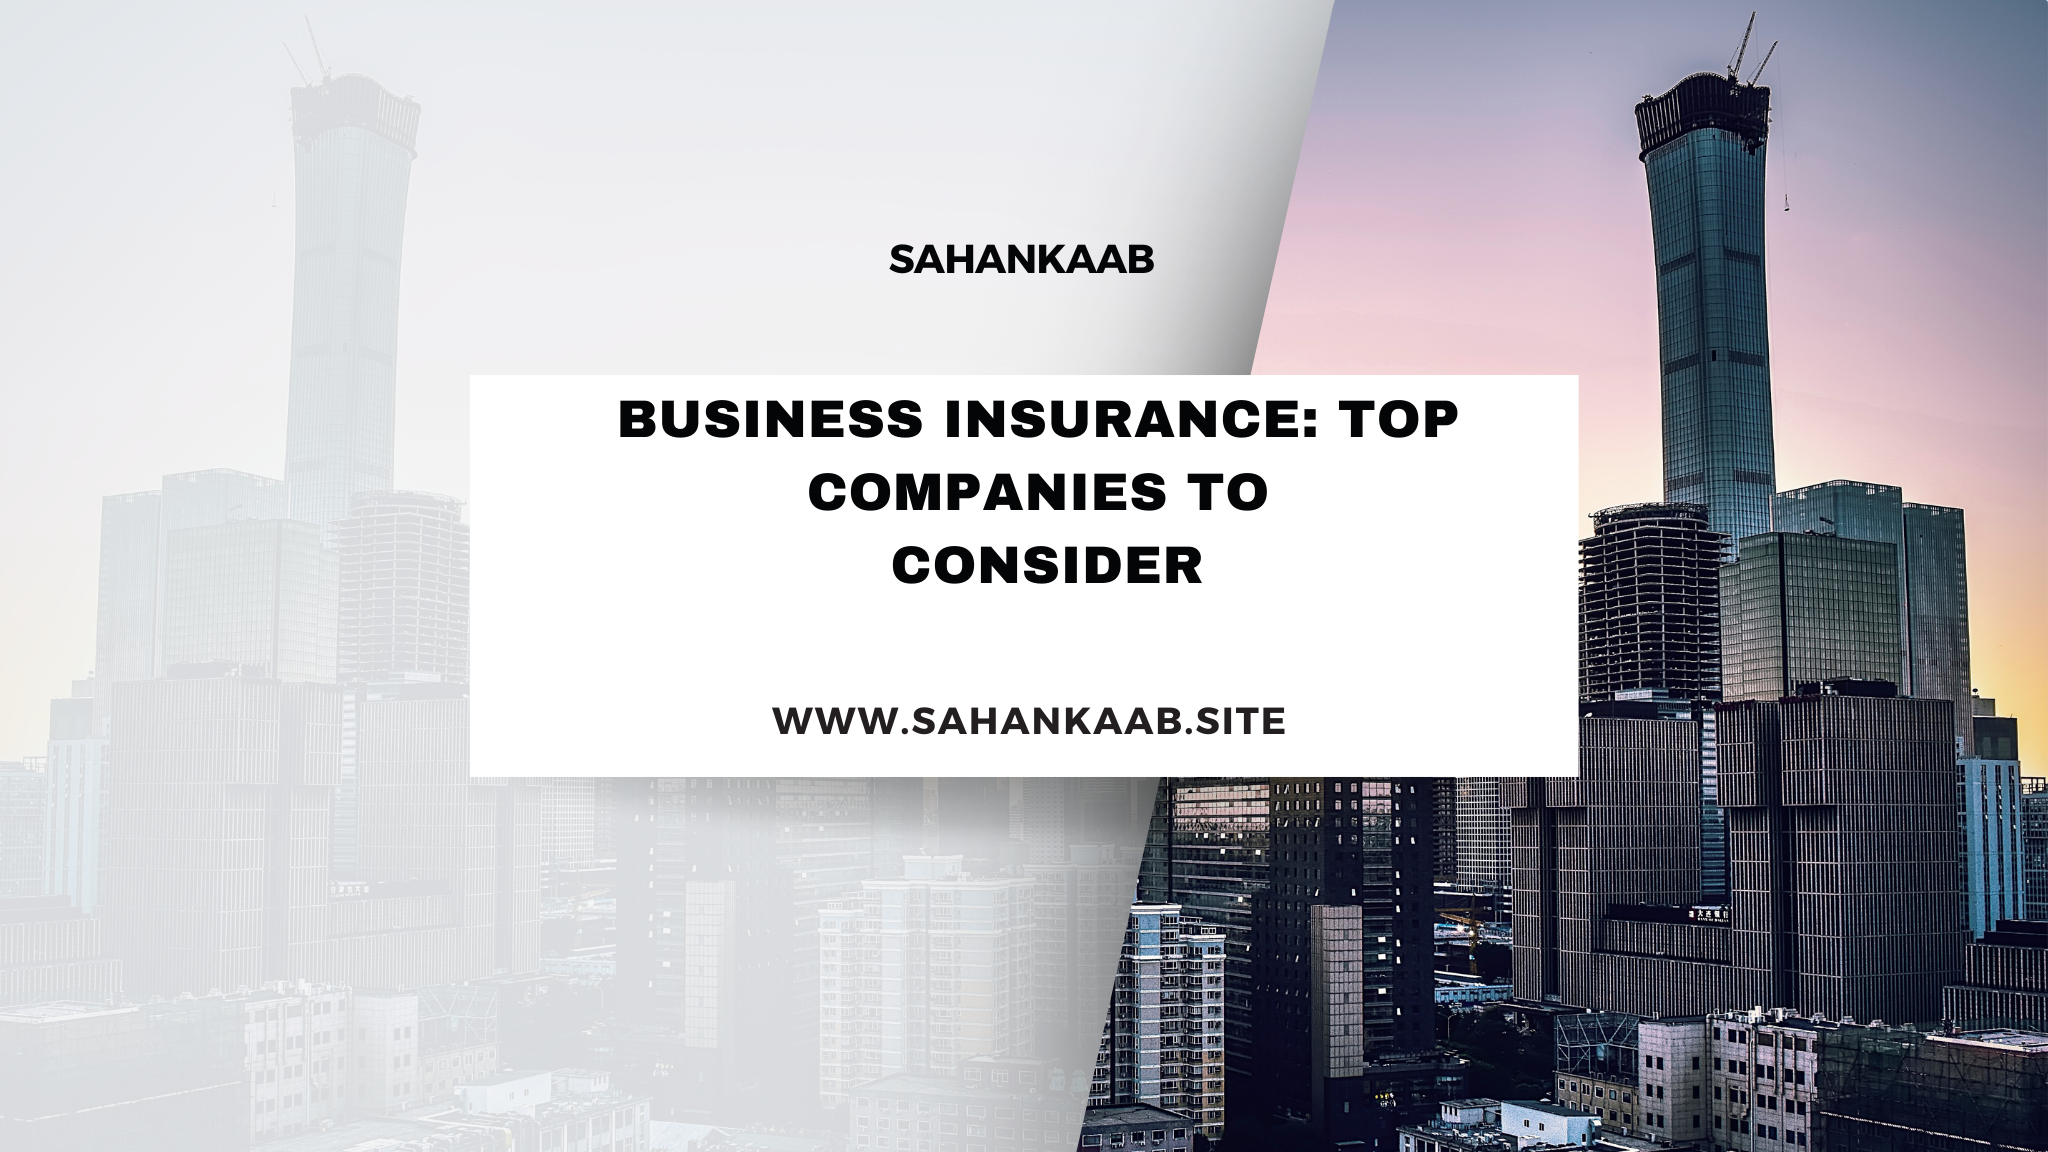 Business Insurance: Top Companies to Consider